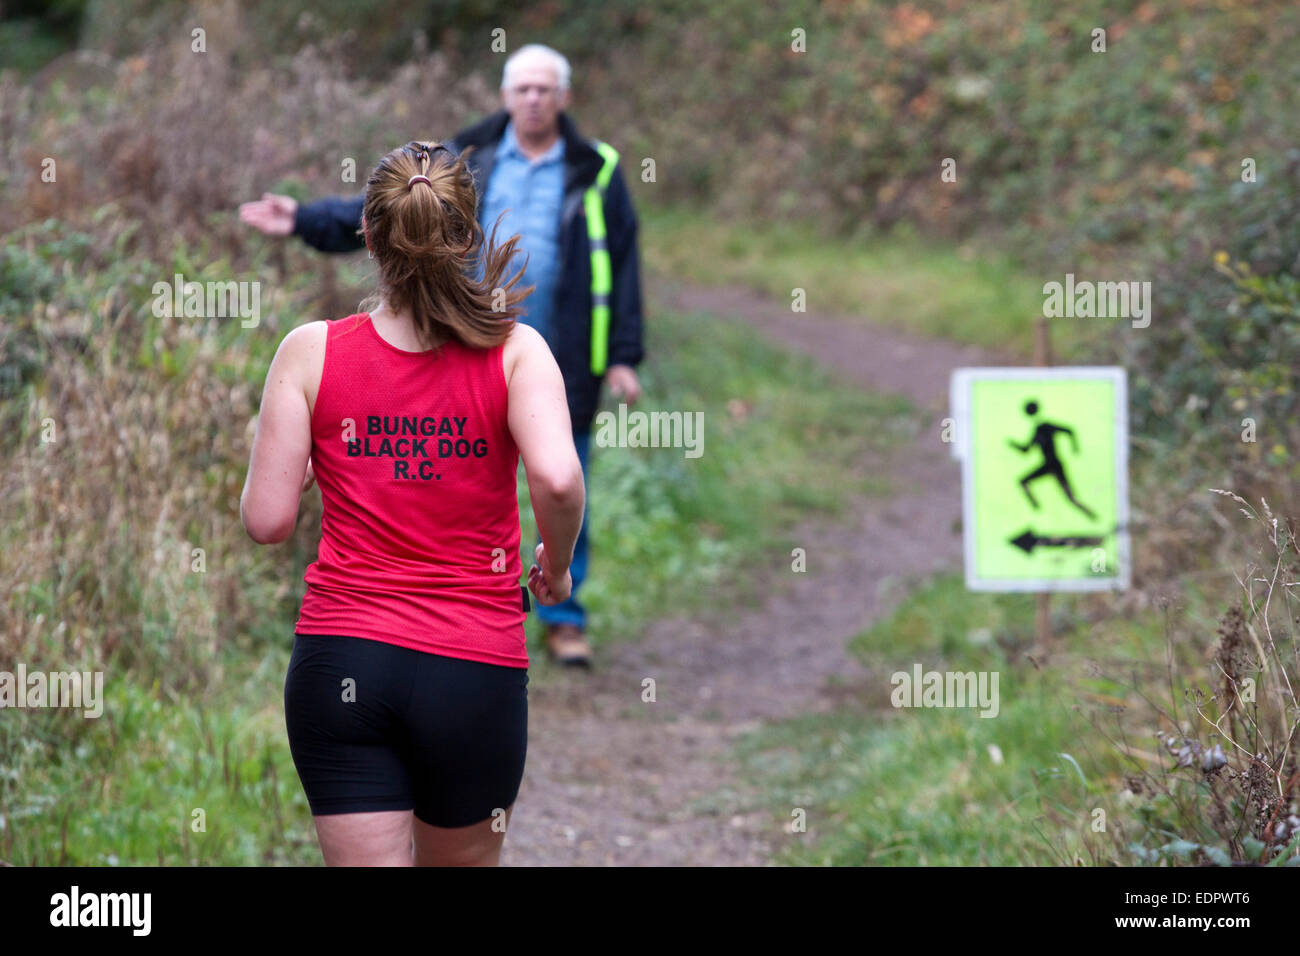 Woman runner in red top approaches a marshaled turn in a cross country race. Stock Photo